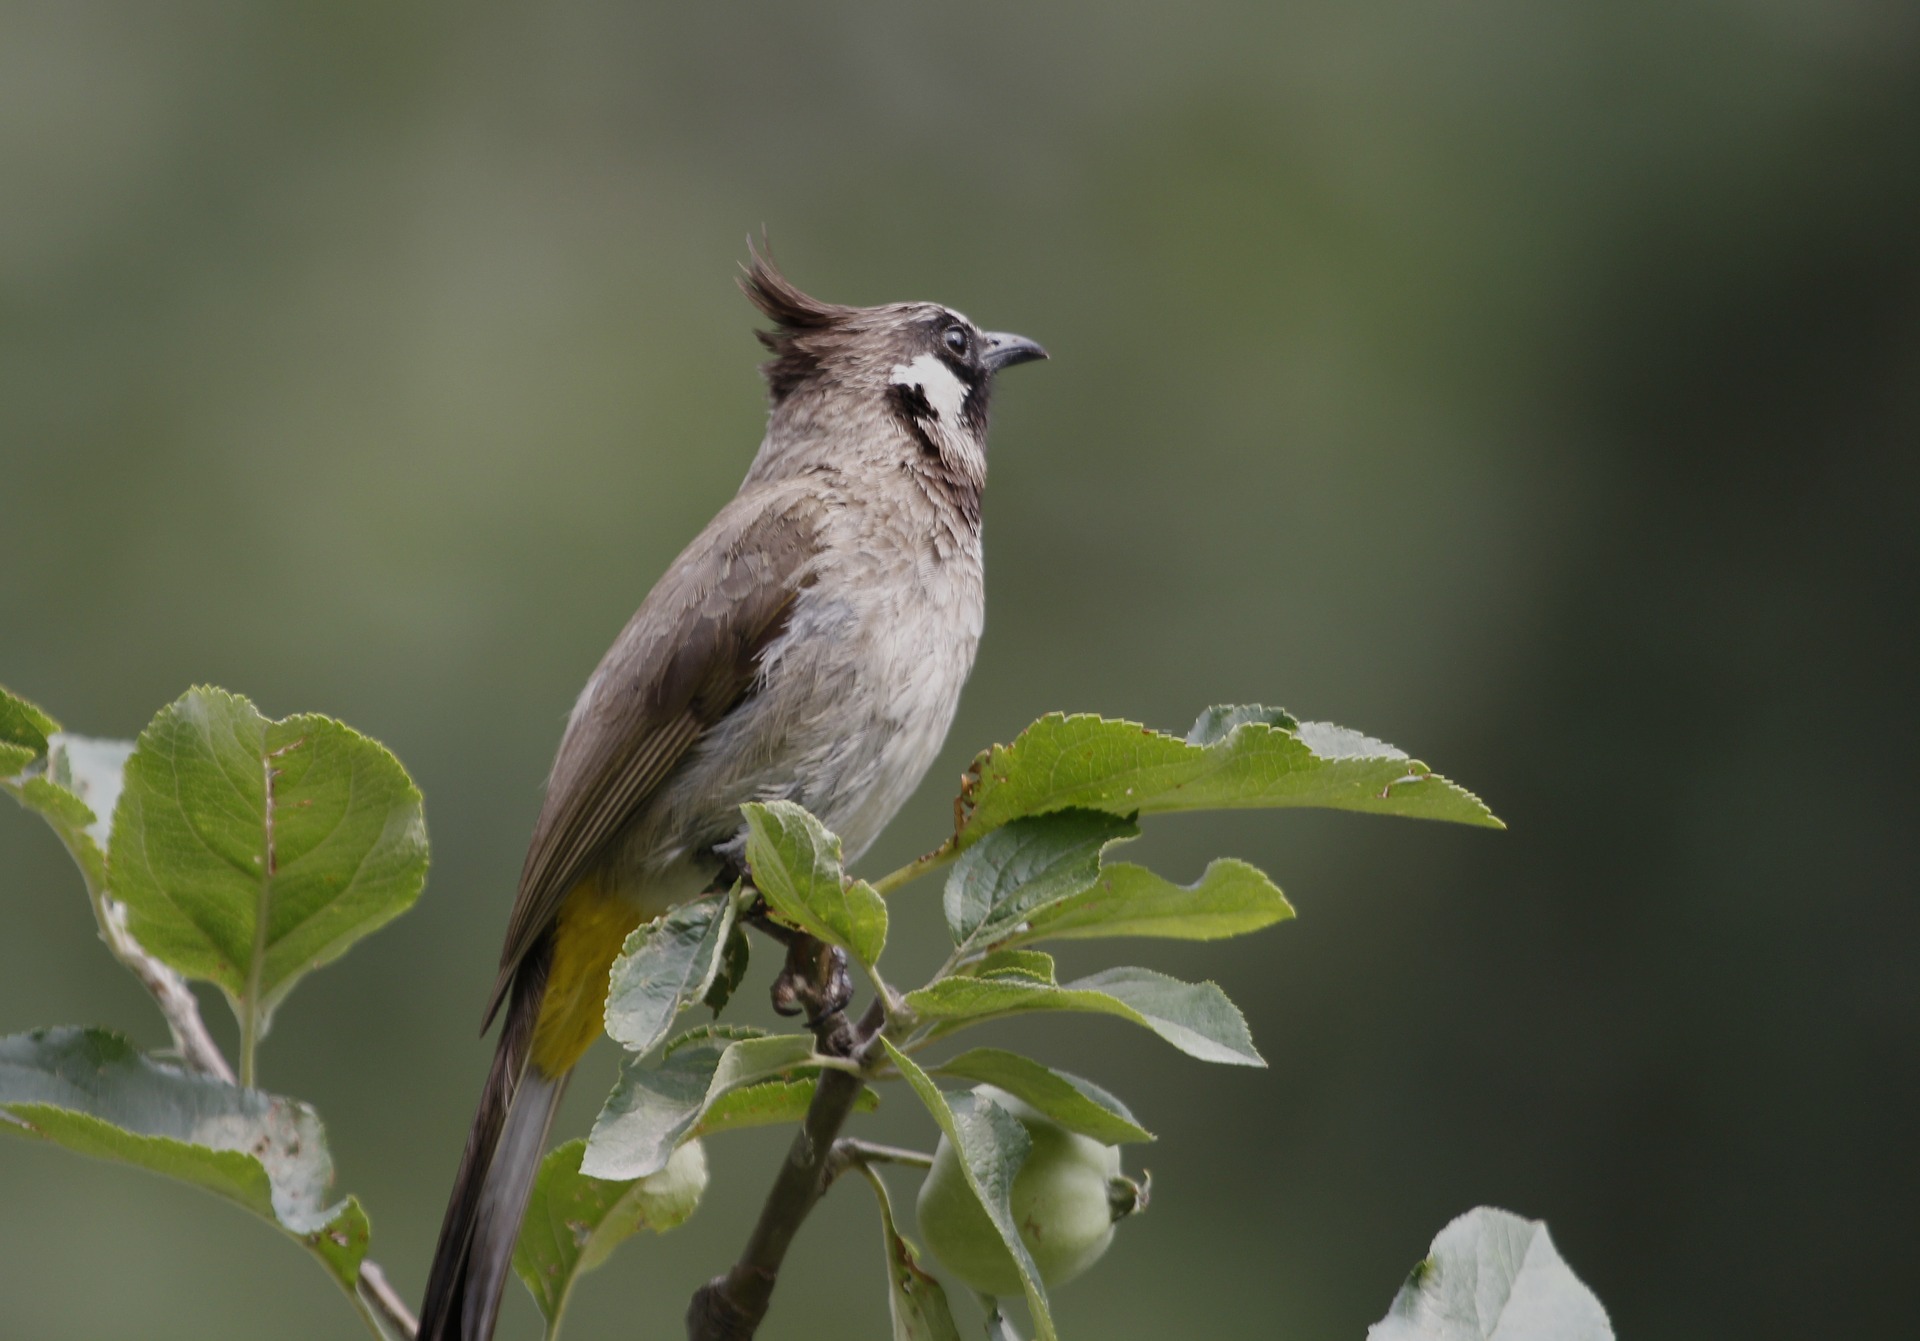 Specialist birds’ population declining in Himalayas due to hardwood forest loss